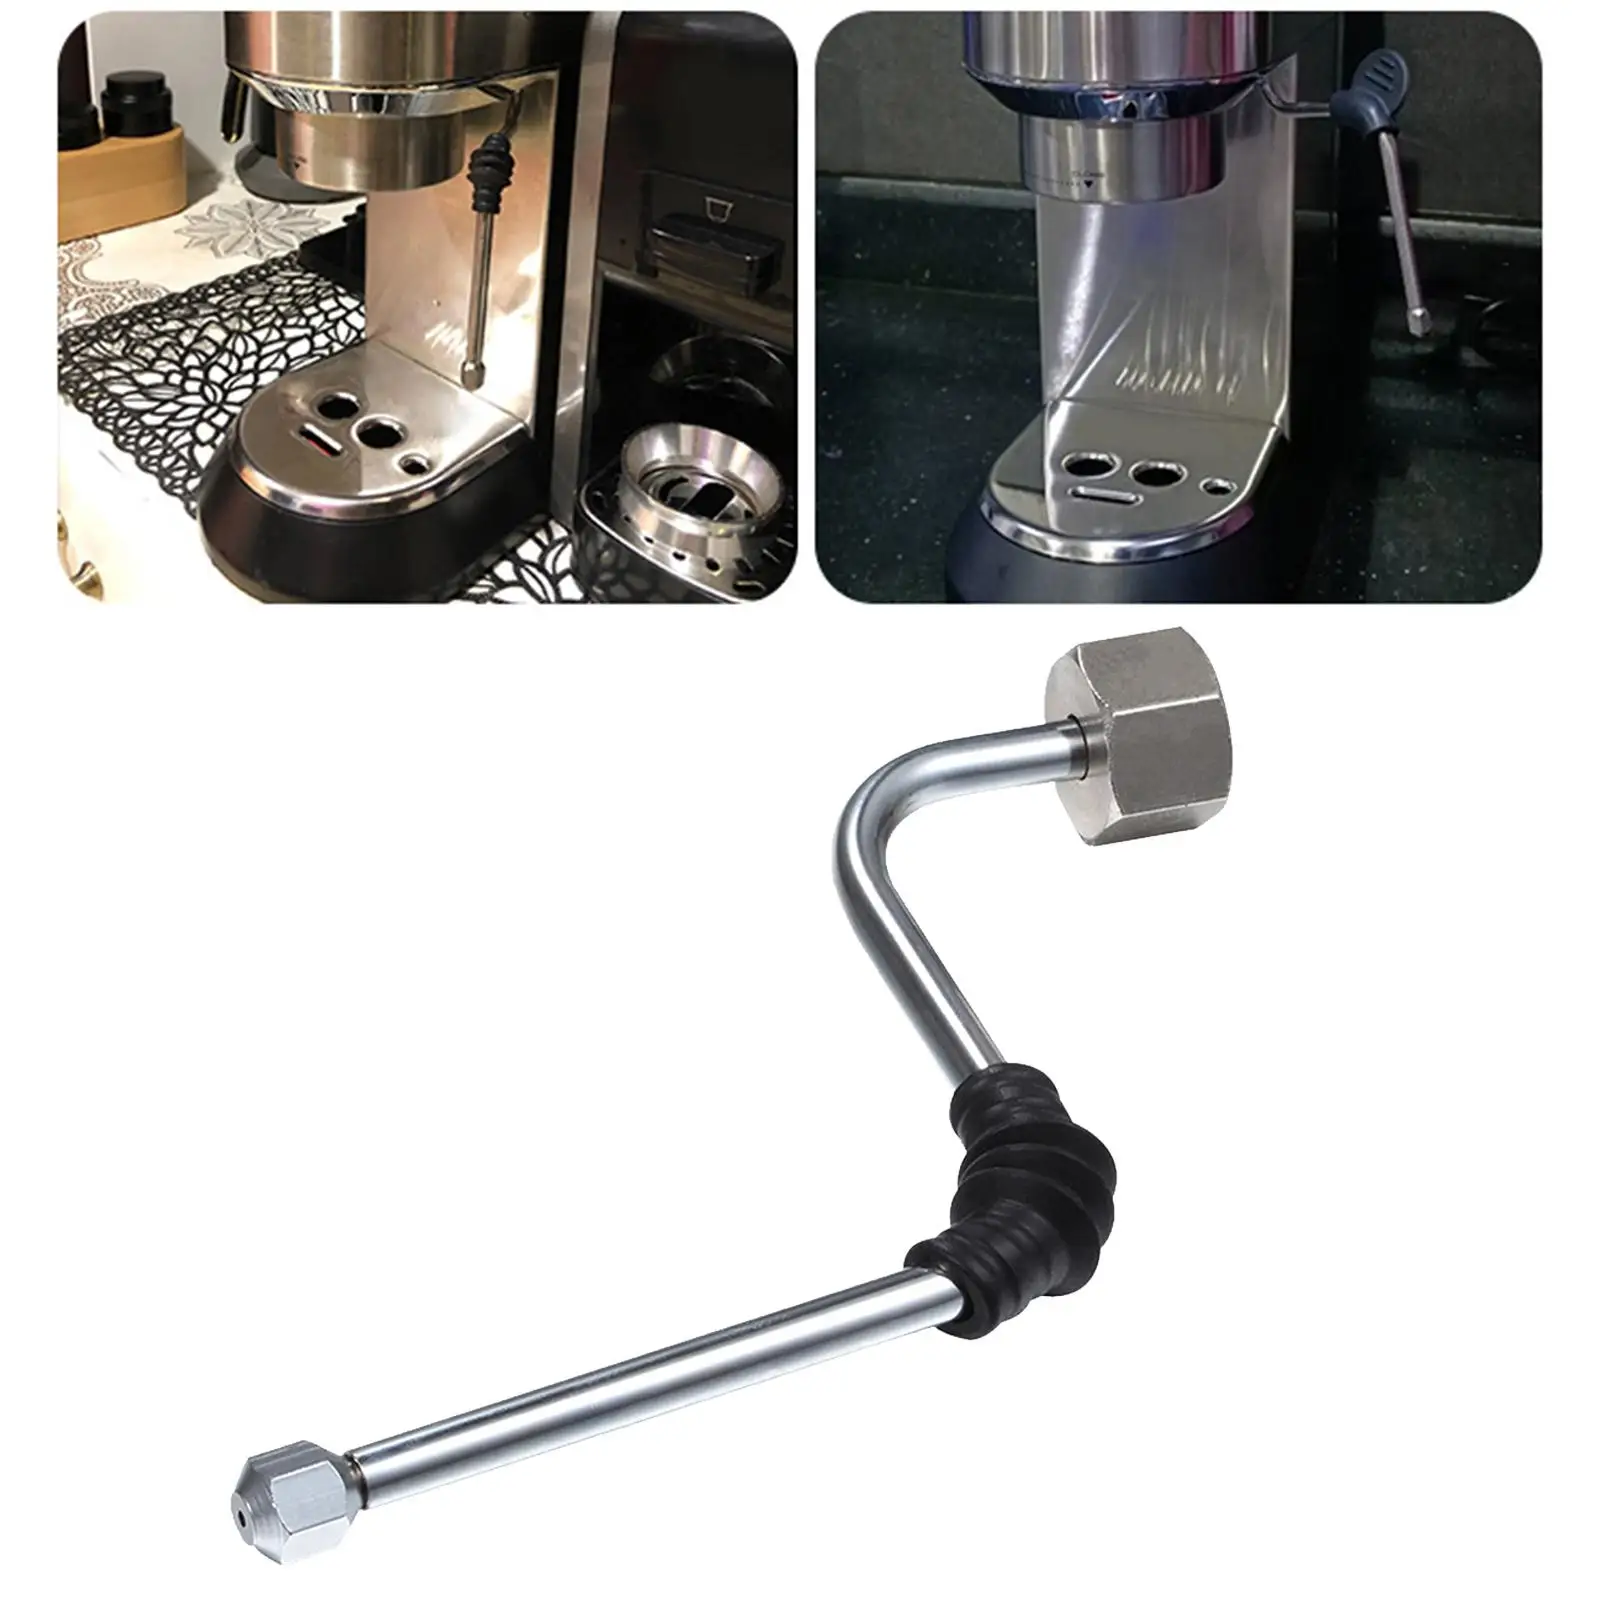 Premium Stainless Steel Tube for Enhanced Milk Frothing - 680/685 Coffee Accessories